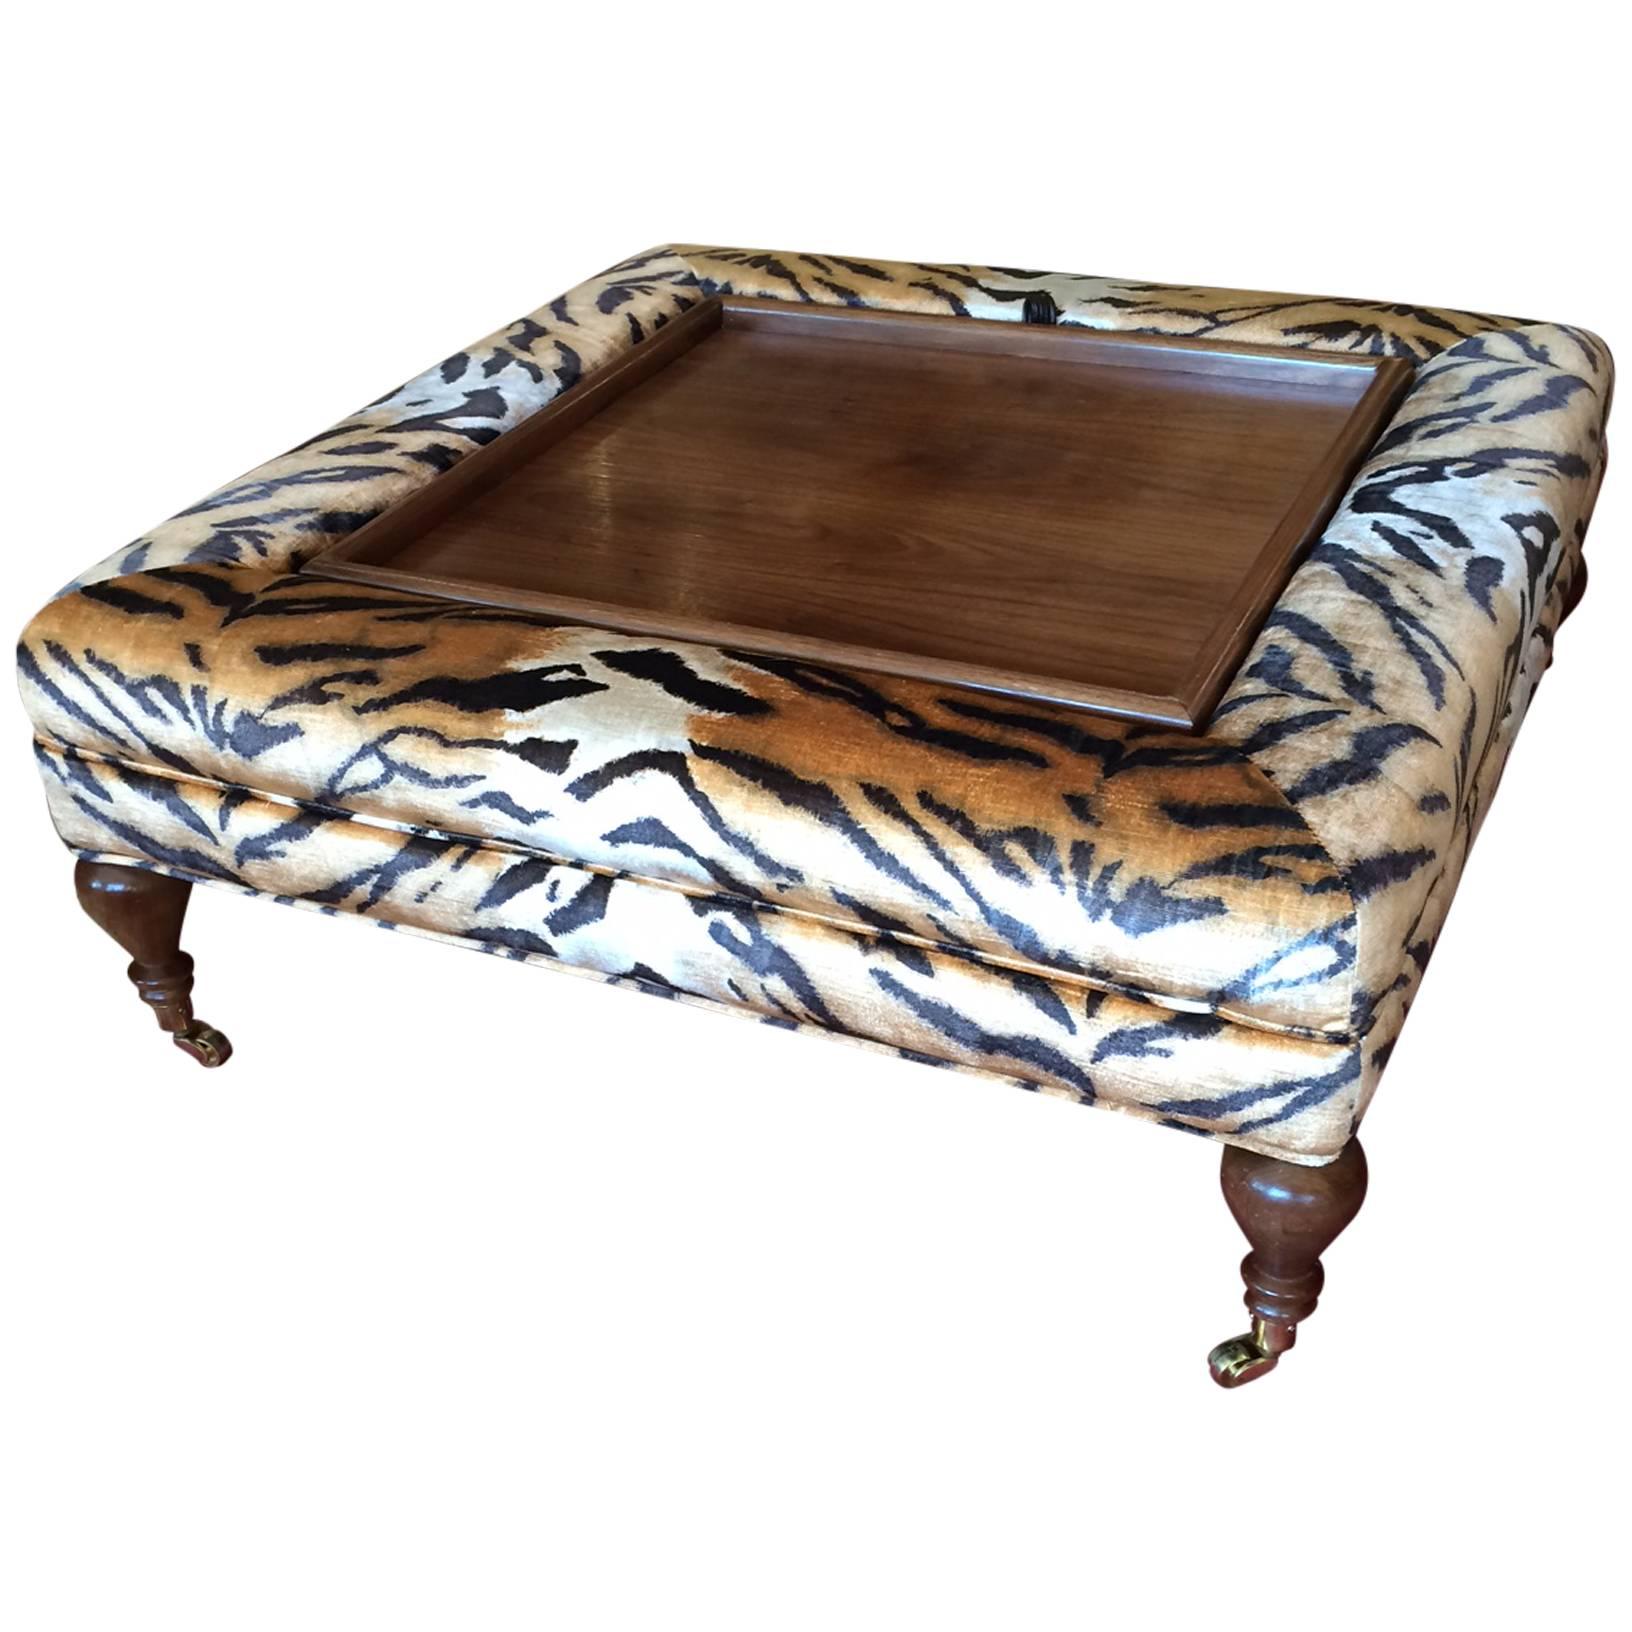 Flip-Top Ottoman Coffee Table Upholstered in Scalamandre Faux Tiger